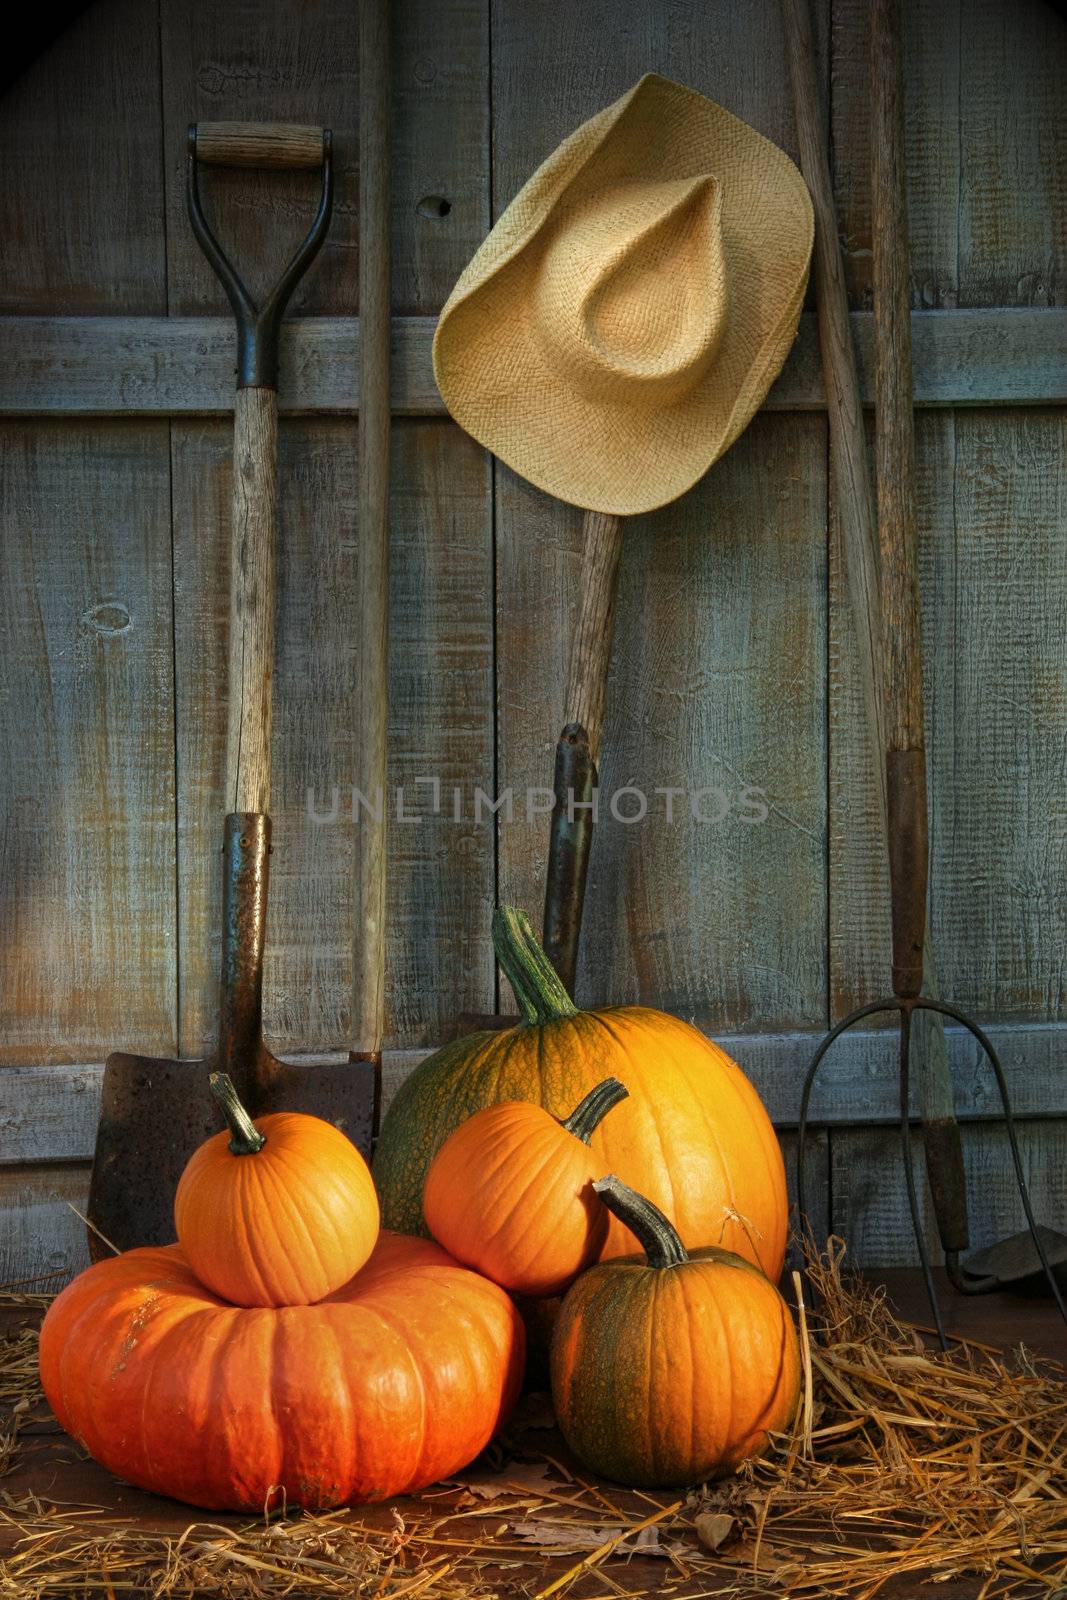 Garden tools in wood shed with pumpkins